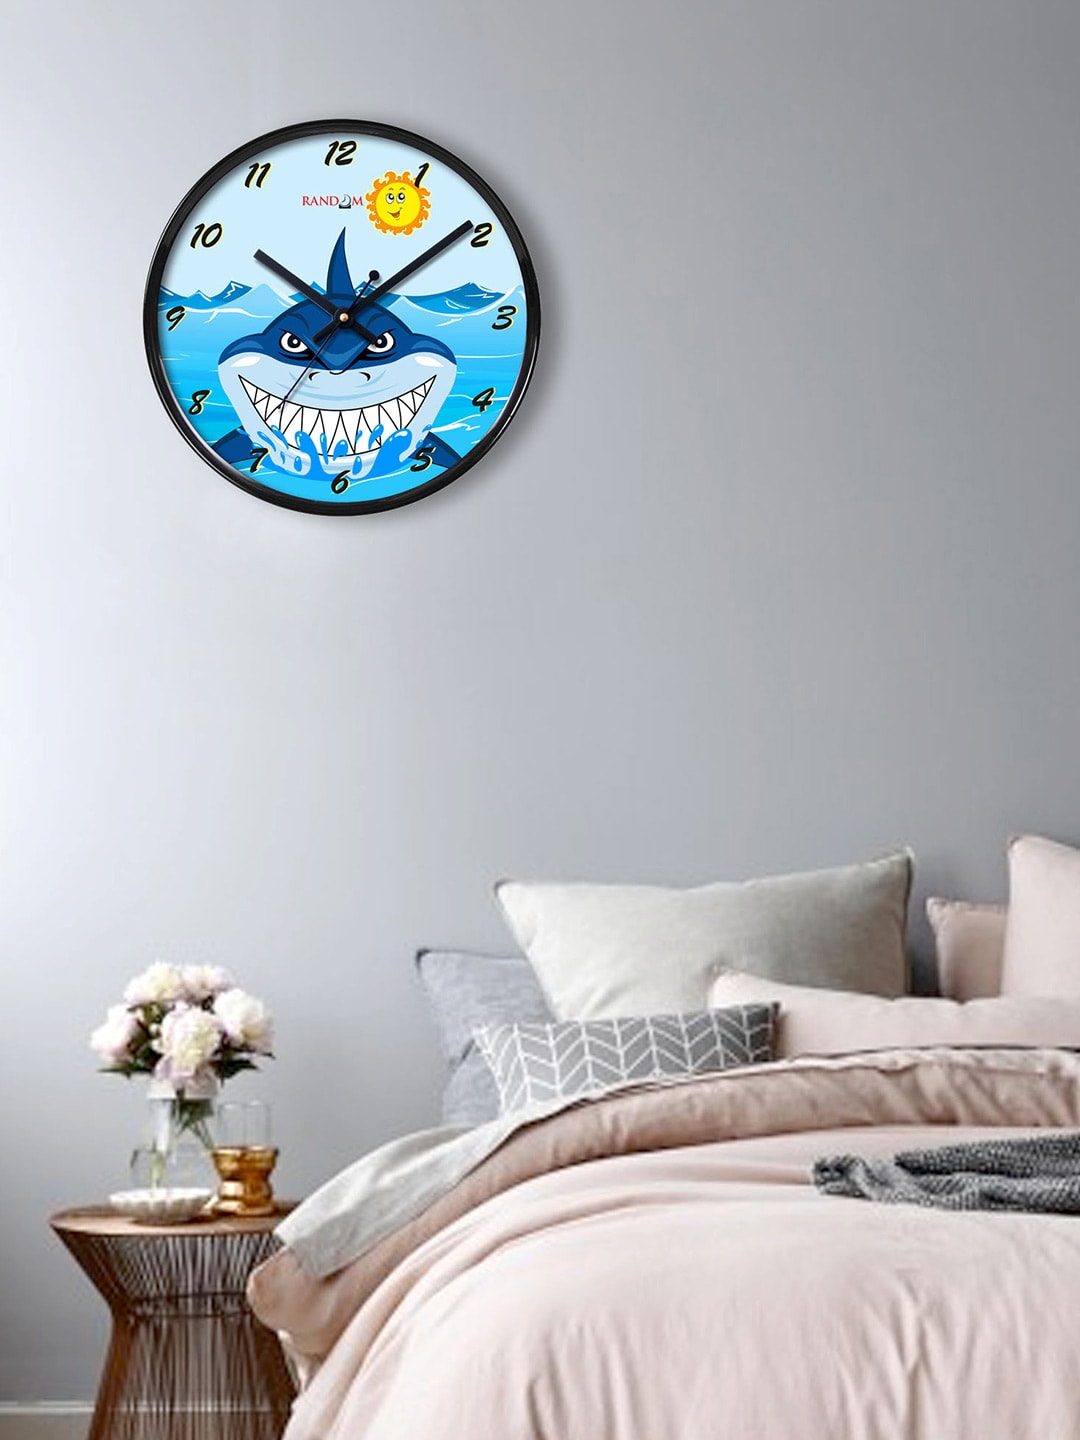 RANDOM Blue Printed Dial 27.94 cm Analogue Wall Clock Price in India